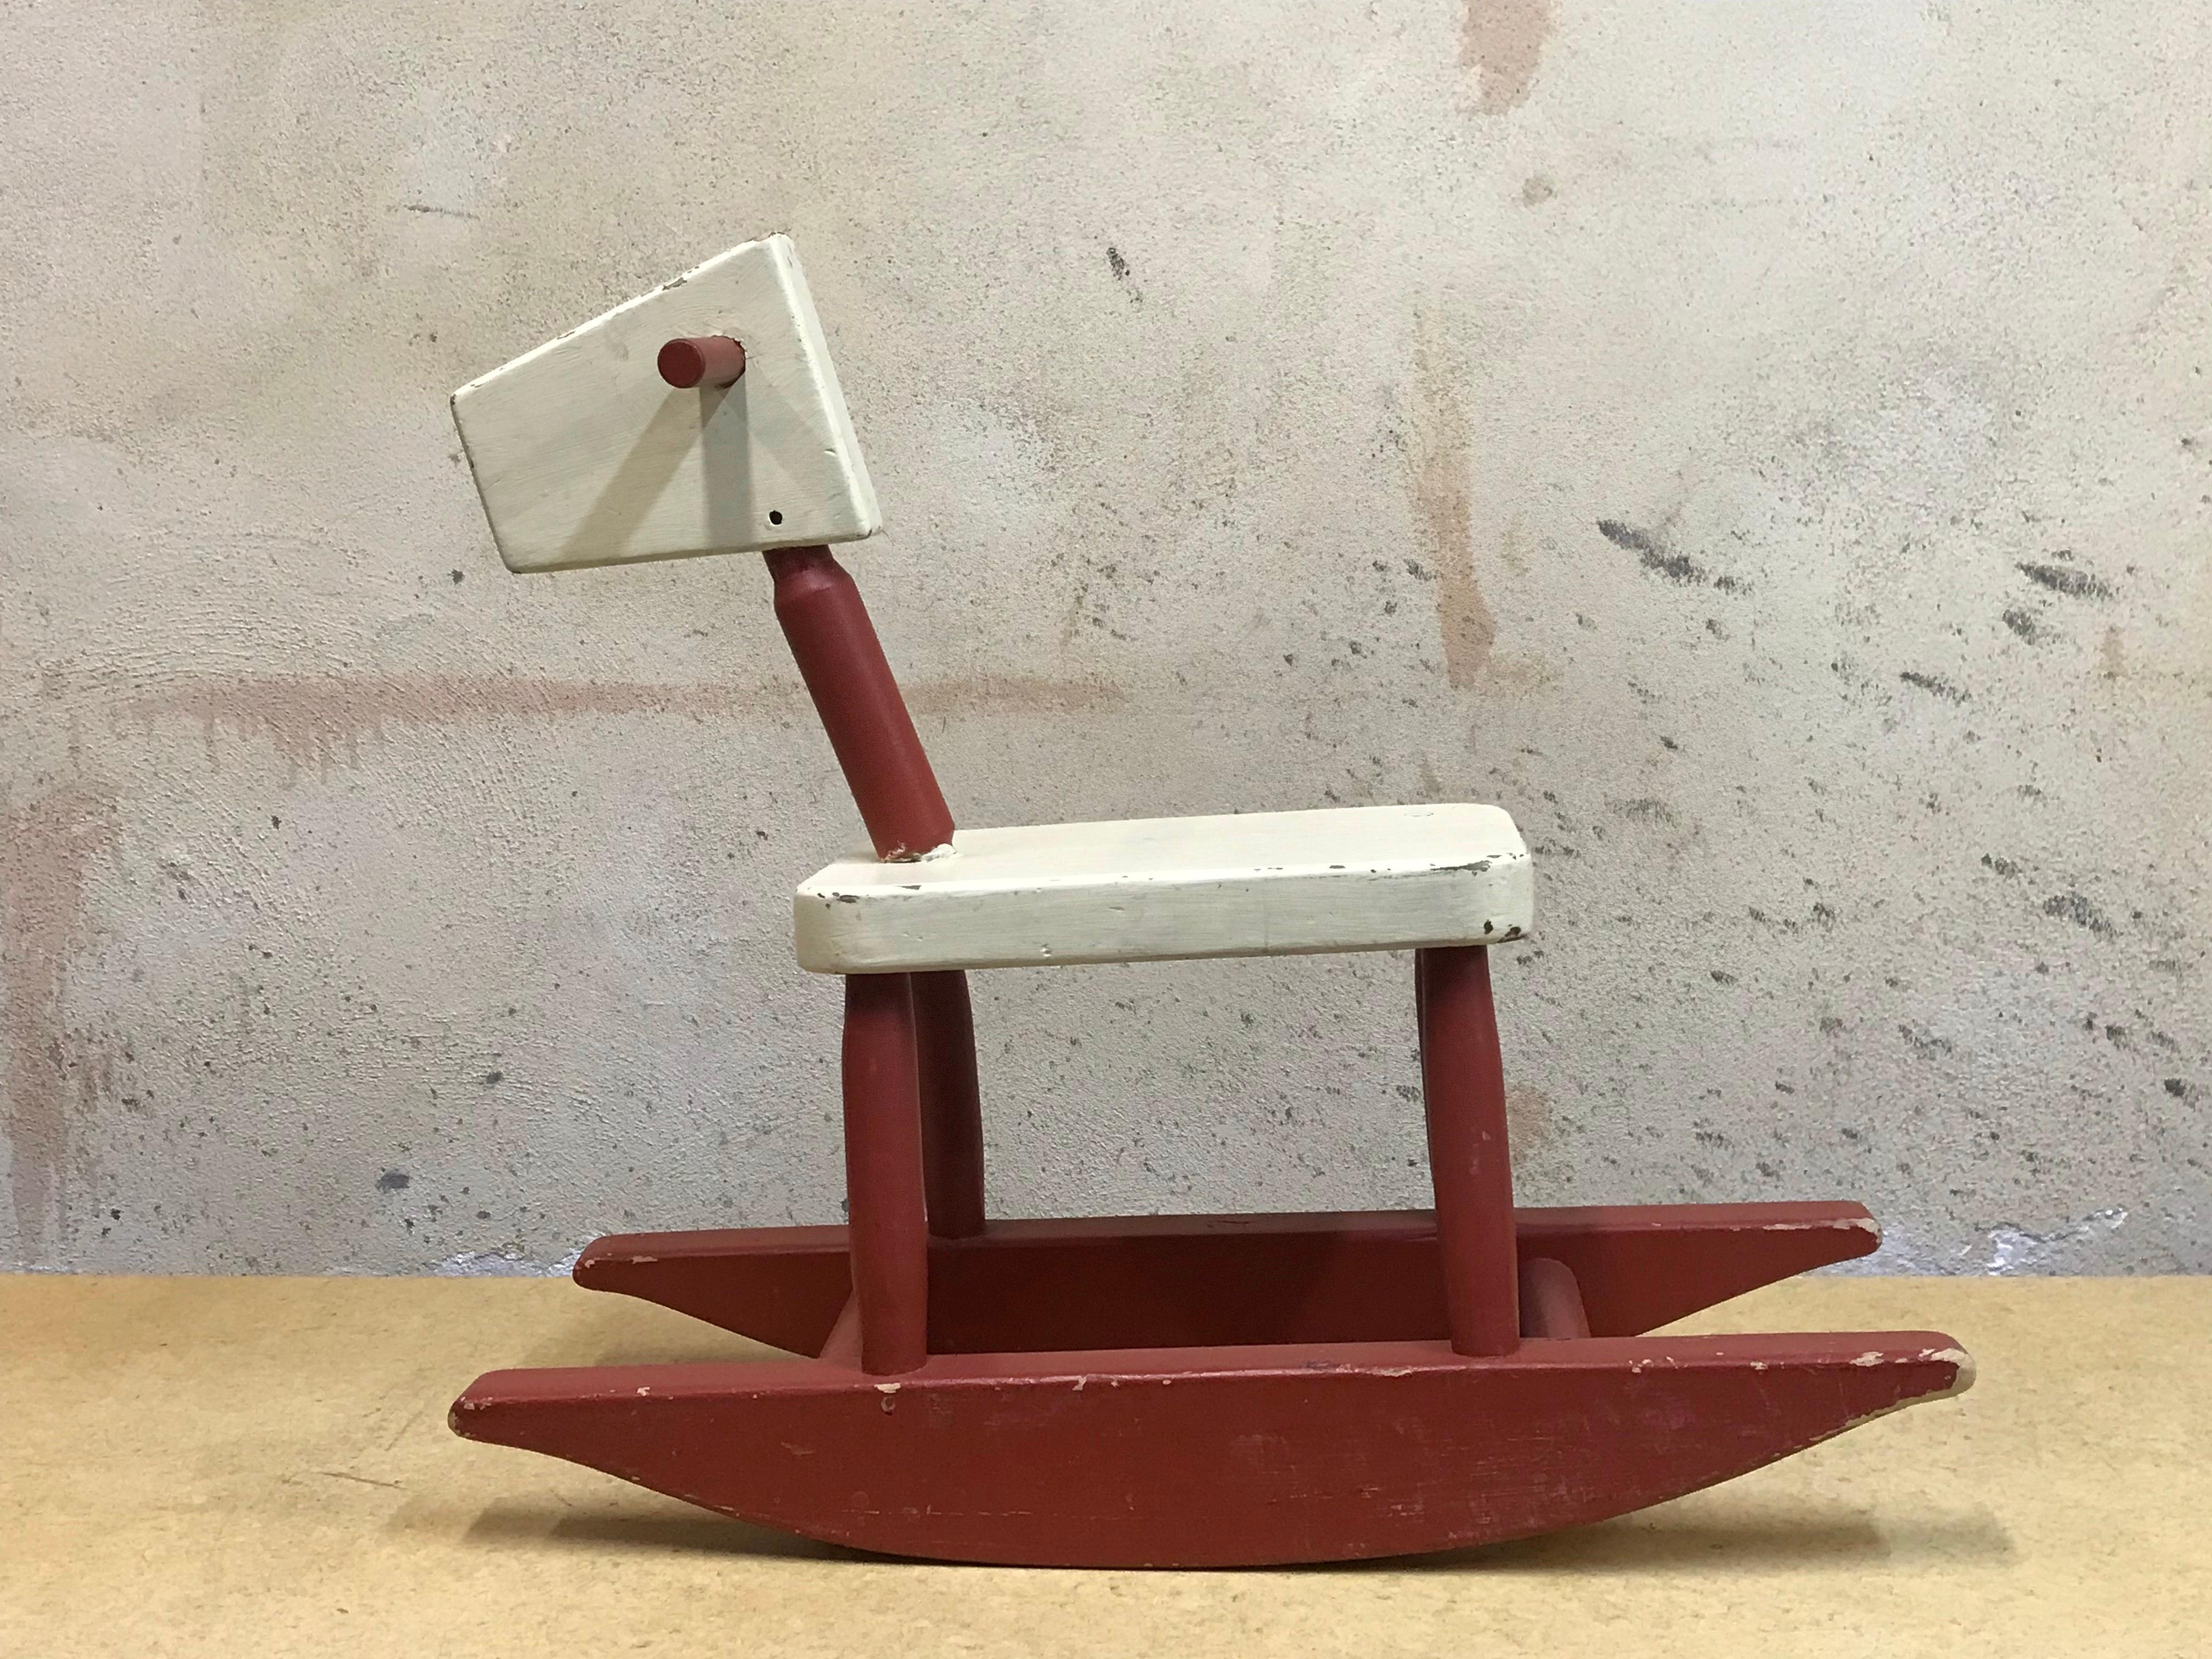 Very cool vintage mid-century children's rocking horse, handmade, circa 1955 with a Bauhaus aesthetic. 
Well constructed, old paint, well functioning, very sculptural and usable as a toy.